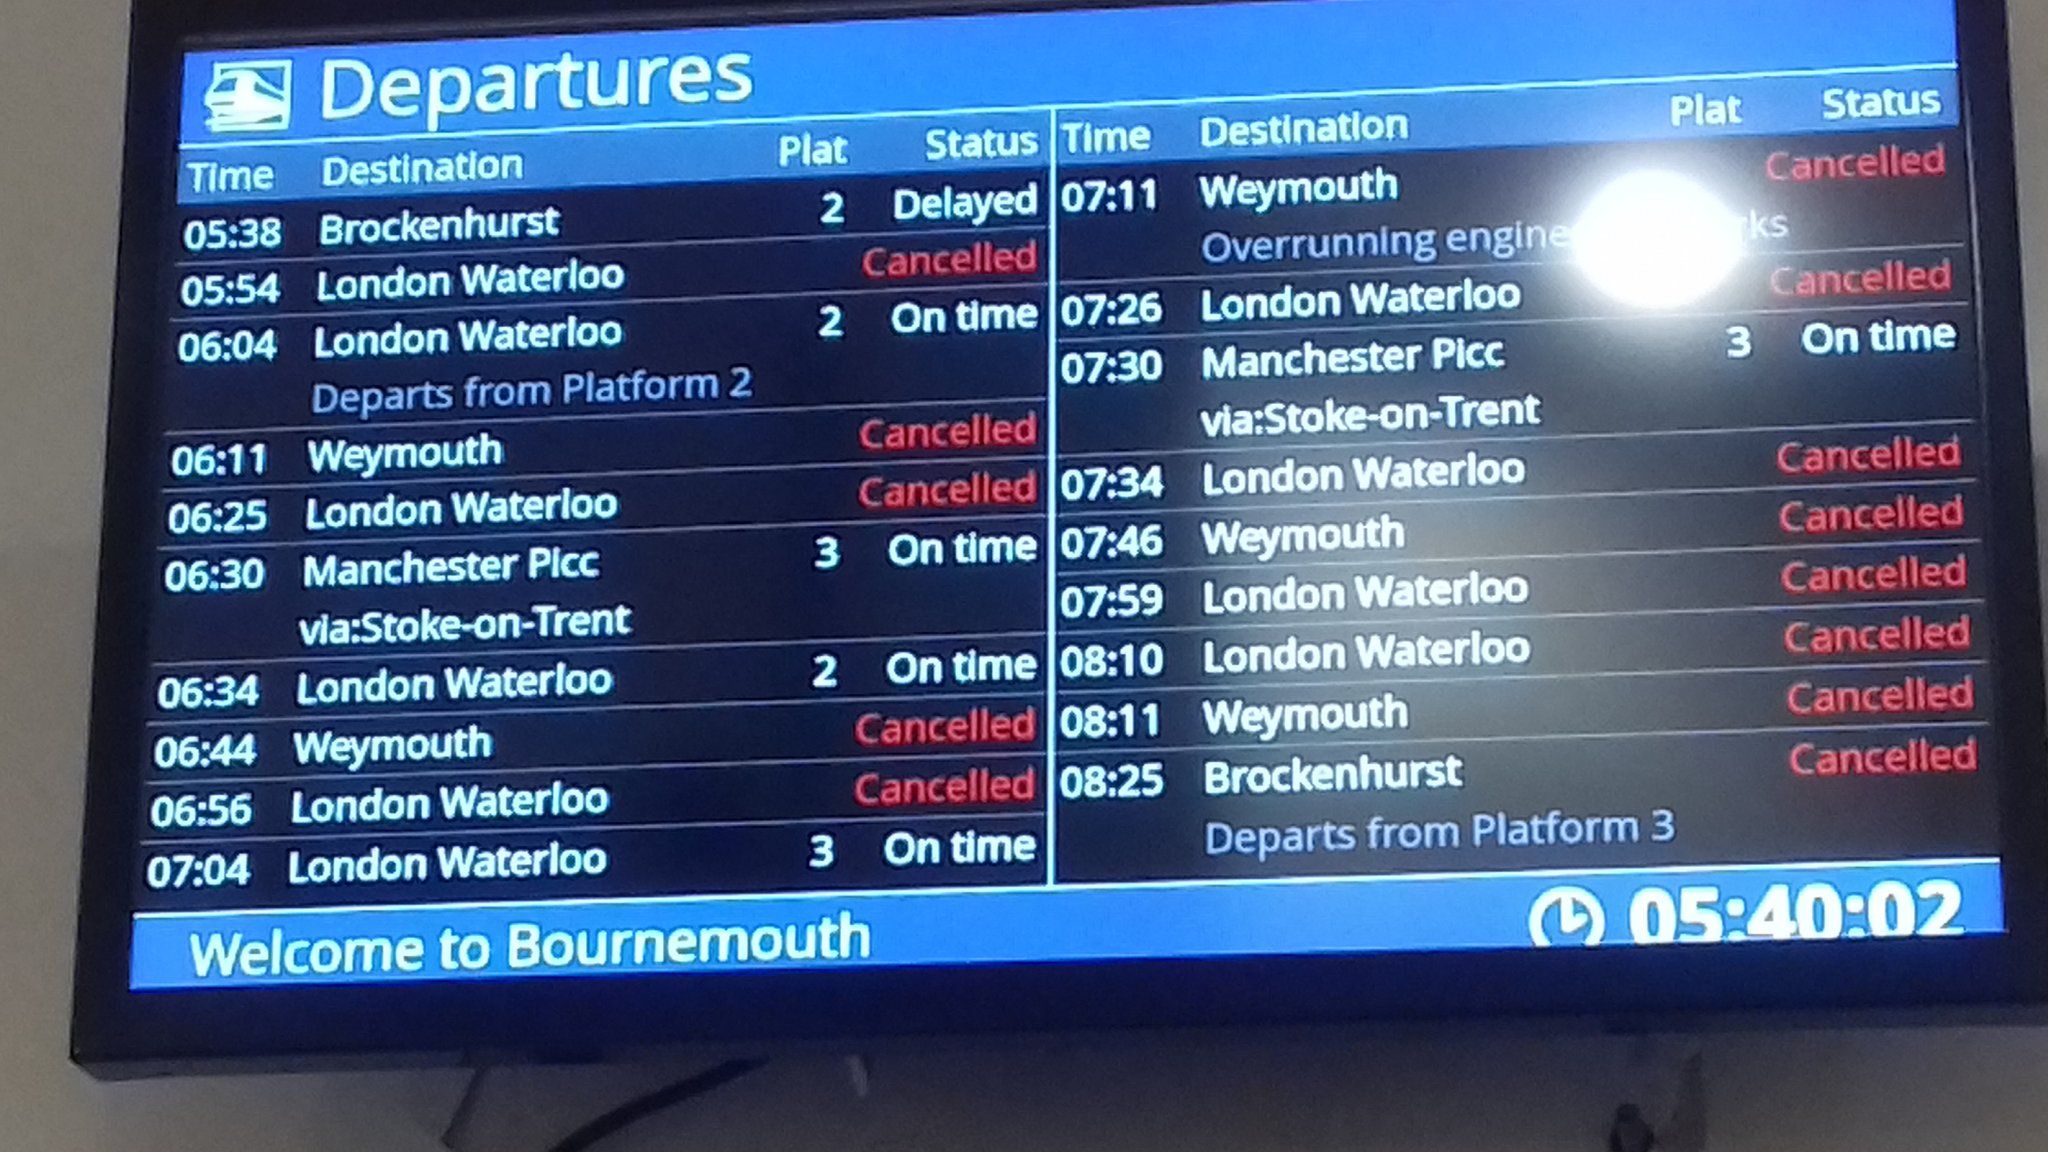 Departure boards showing delayed or cancelled messages